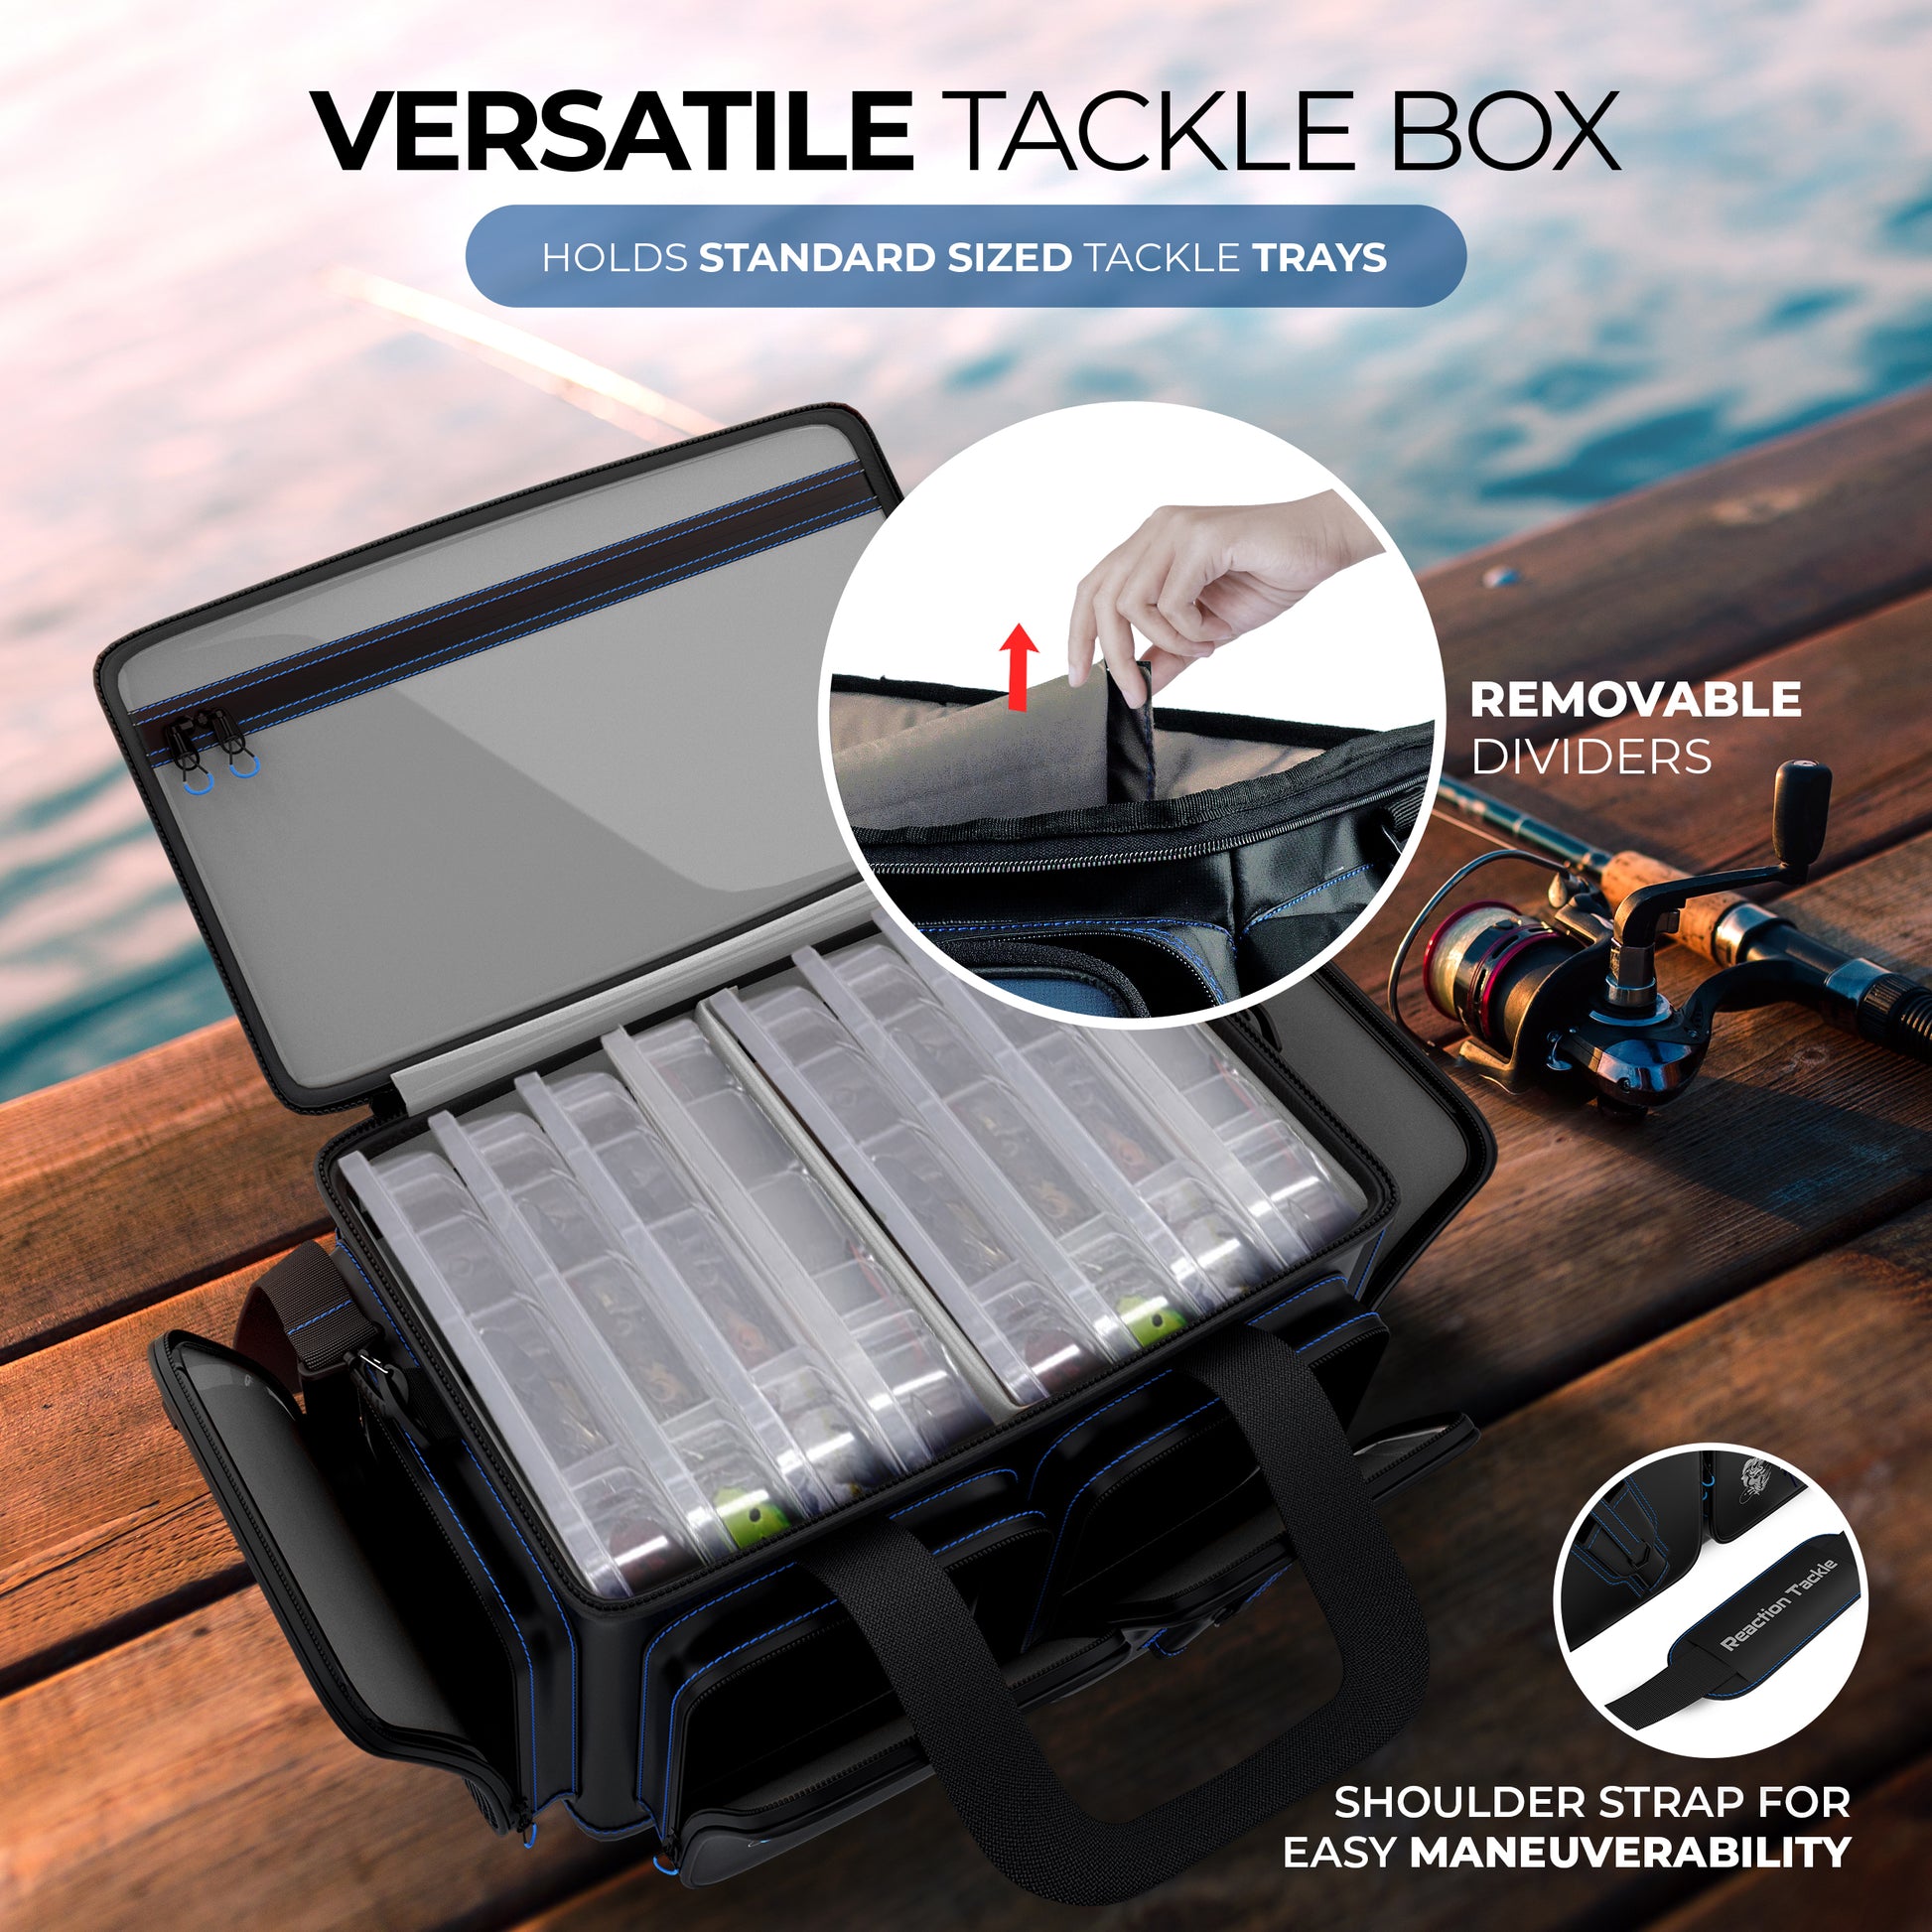 Plastic Fishing Tackle Boxes & Bags for sale, Shop with Afterpay